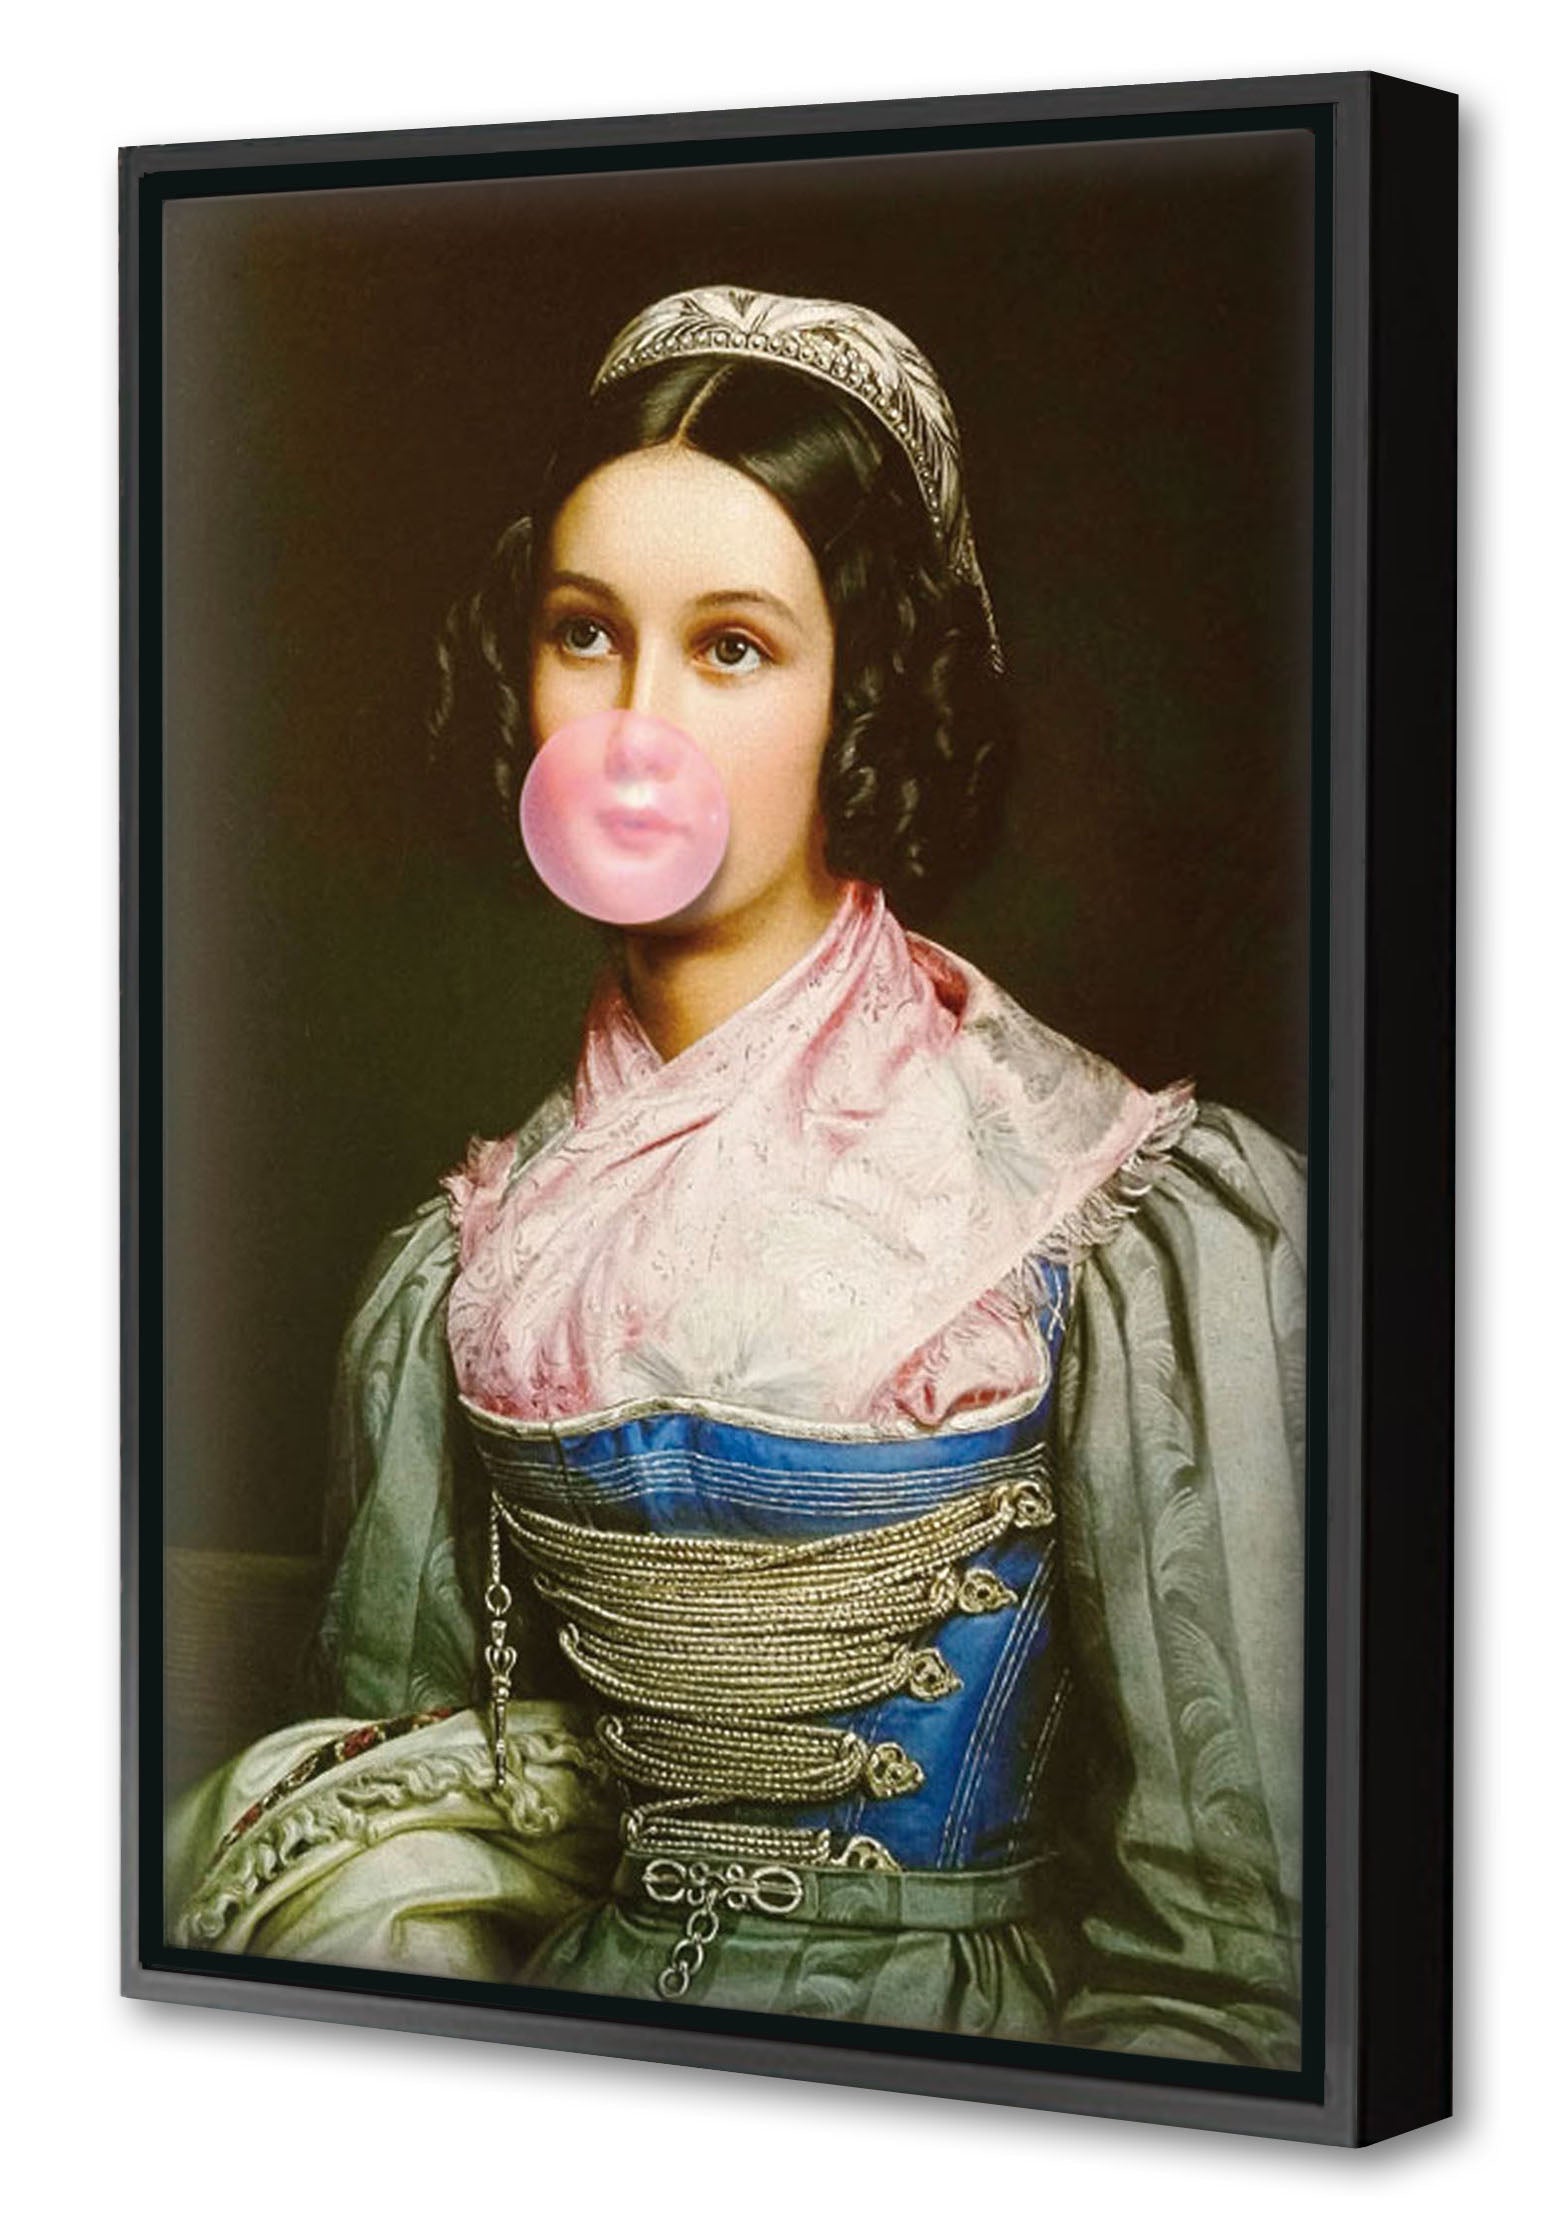 Chewing Gum #1-historical, print-Canvas Print with Box Frame-40 x 60 cm-BLUE SHAKER